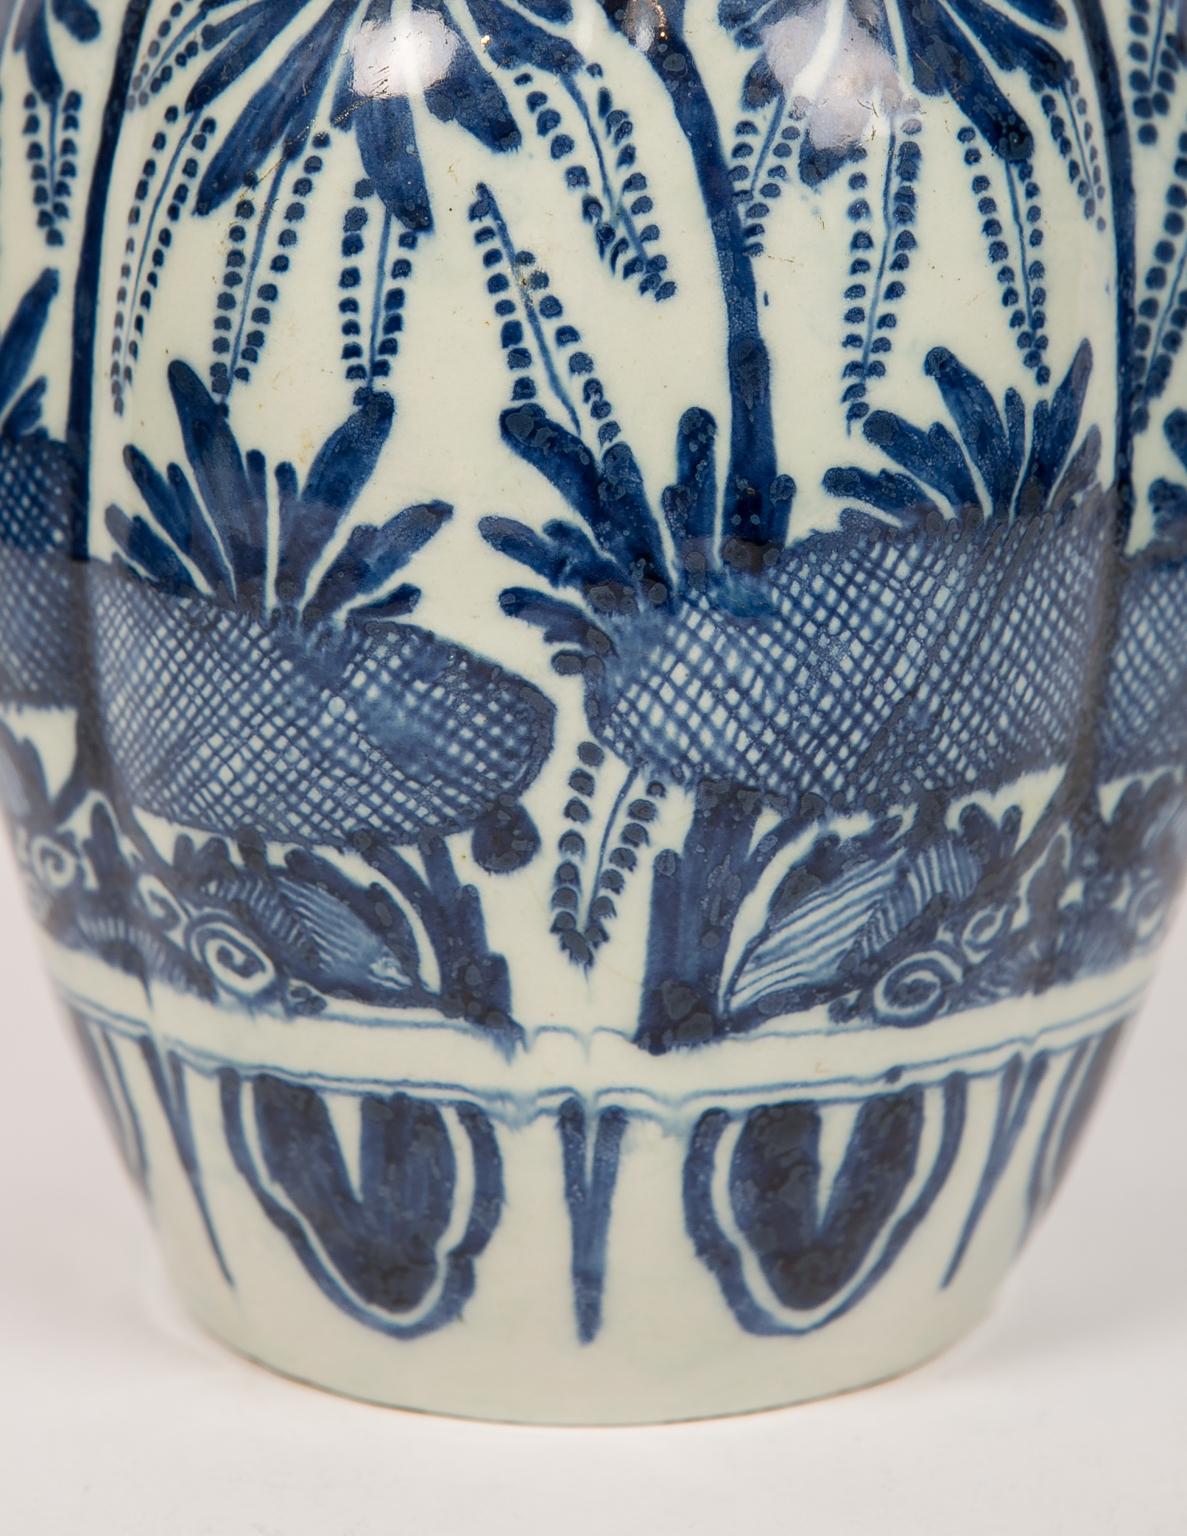 An antique blue and white Dutch Delft ginger jar made in the 18th century, circa 1780. The jar features floral design in deep cobalt blue and a beautiful glaze. The cover with a similar design has attractive lobed edges (see image #4), and a